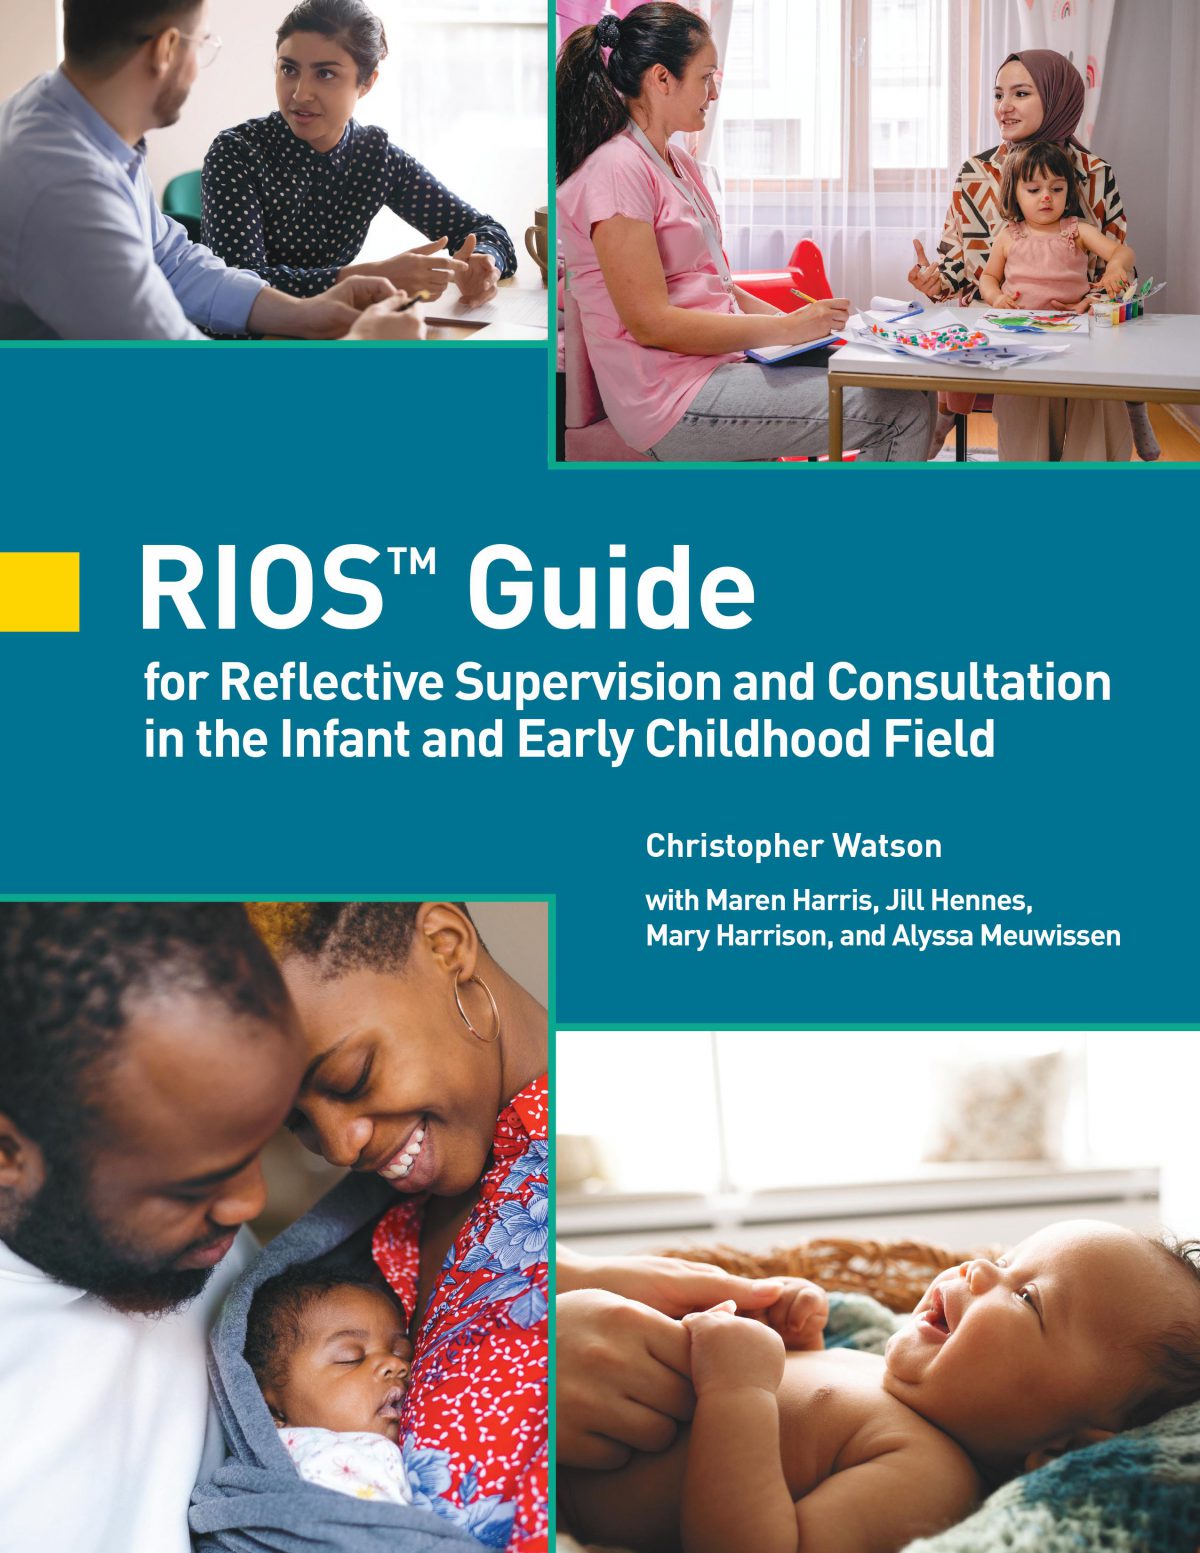 New, first-of-its-kind RIOS™ Guide fills a need for reflective supervision practitioners